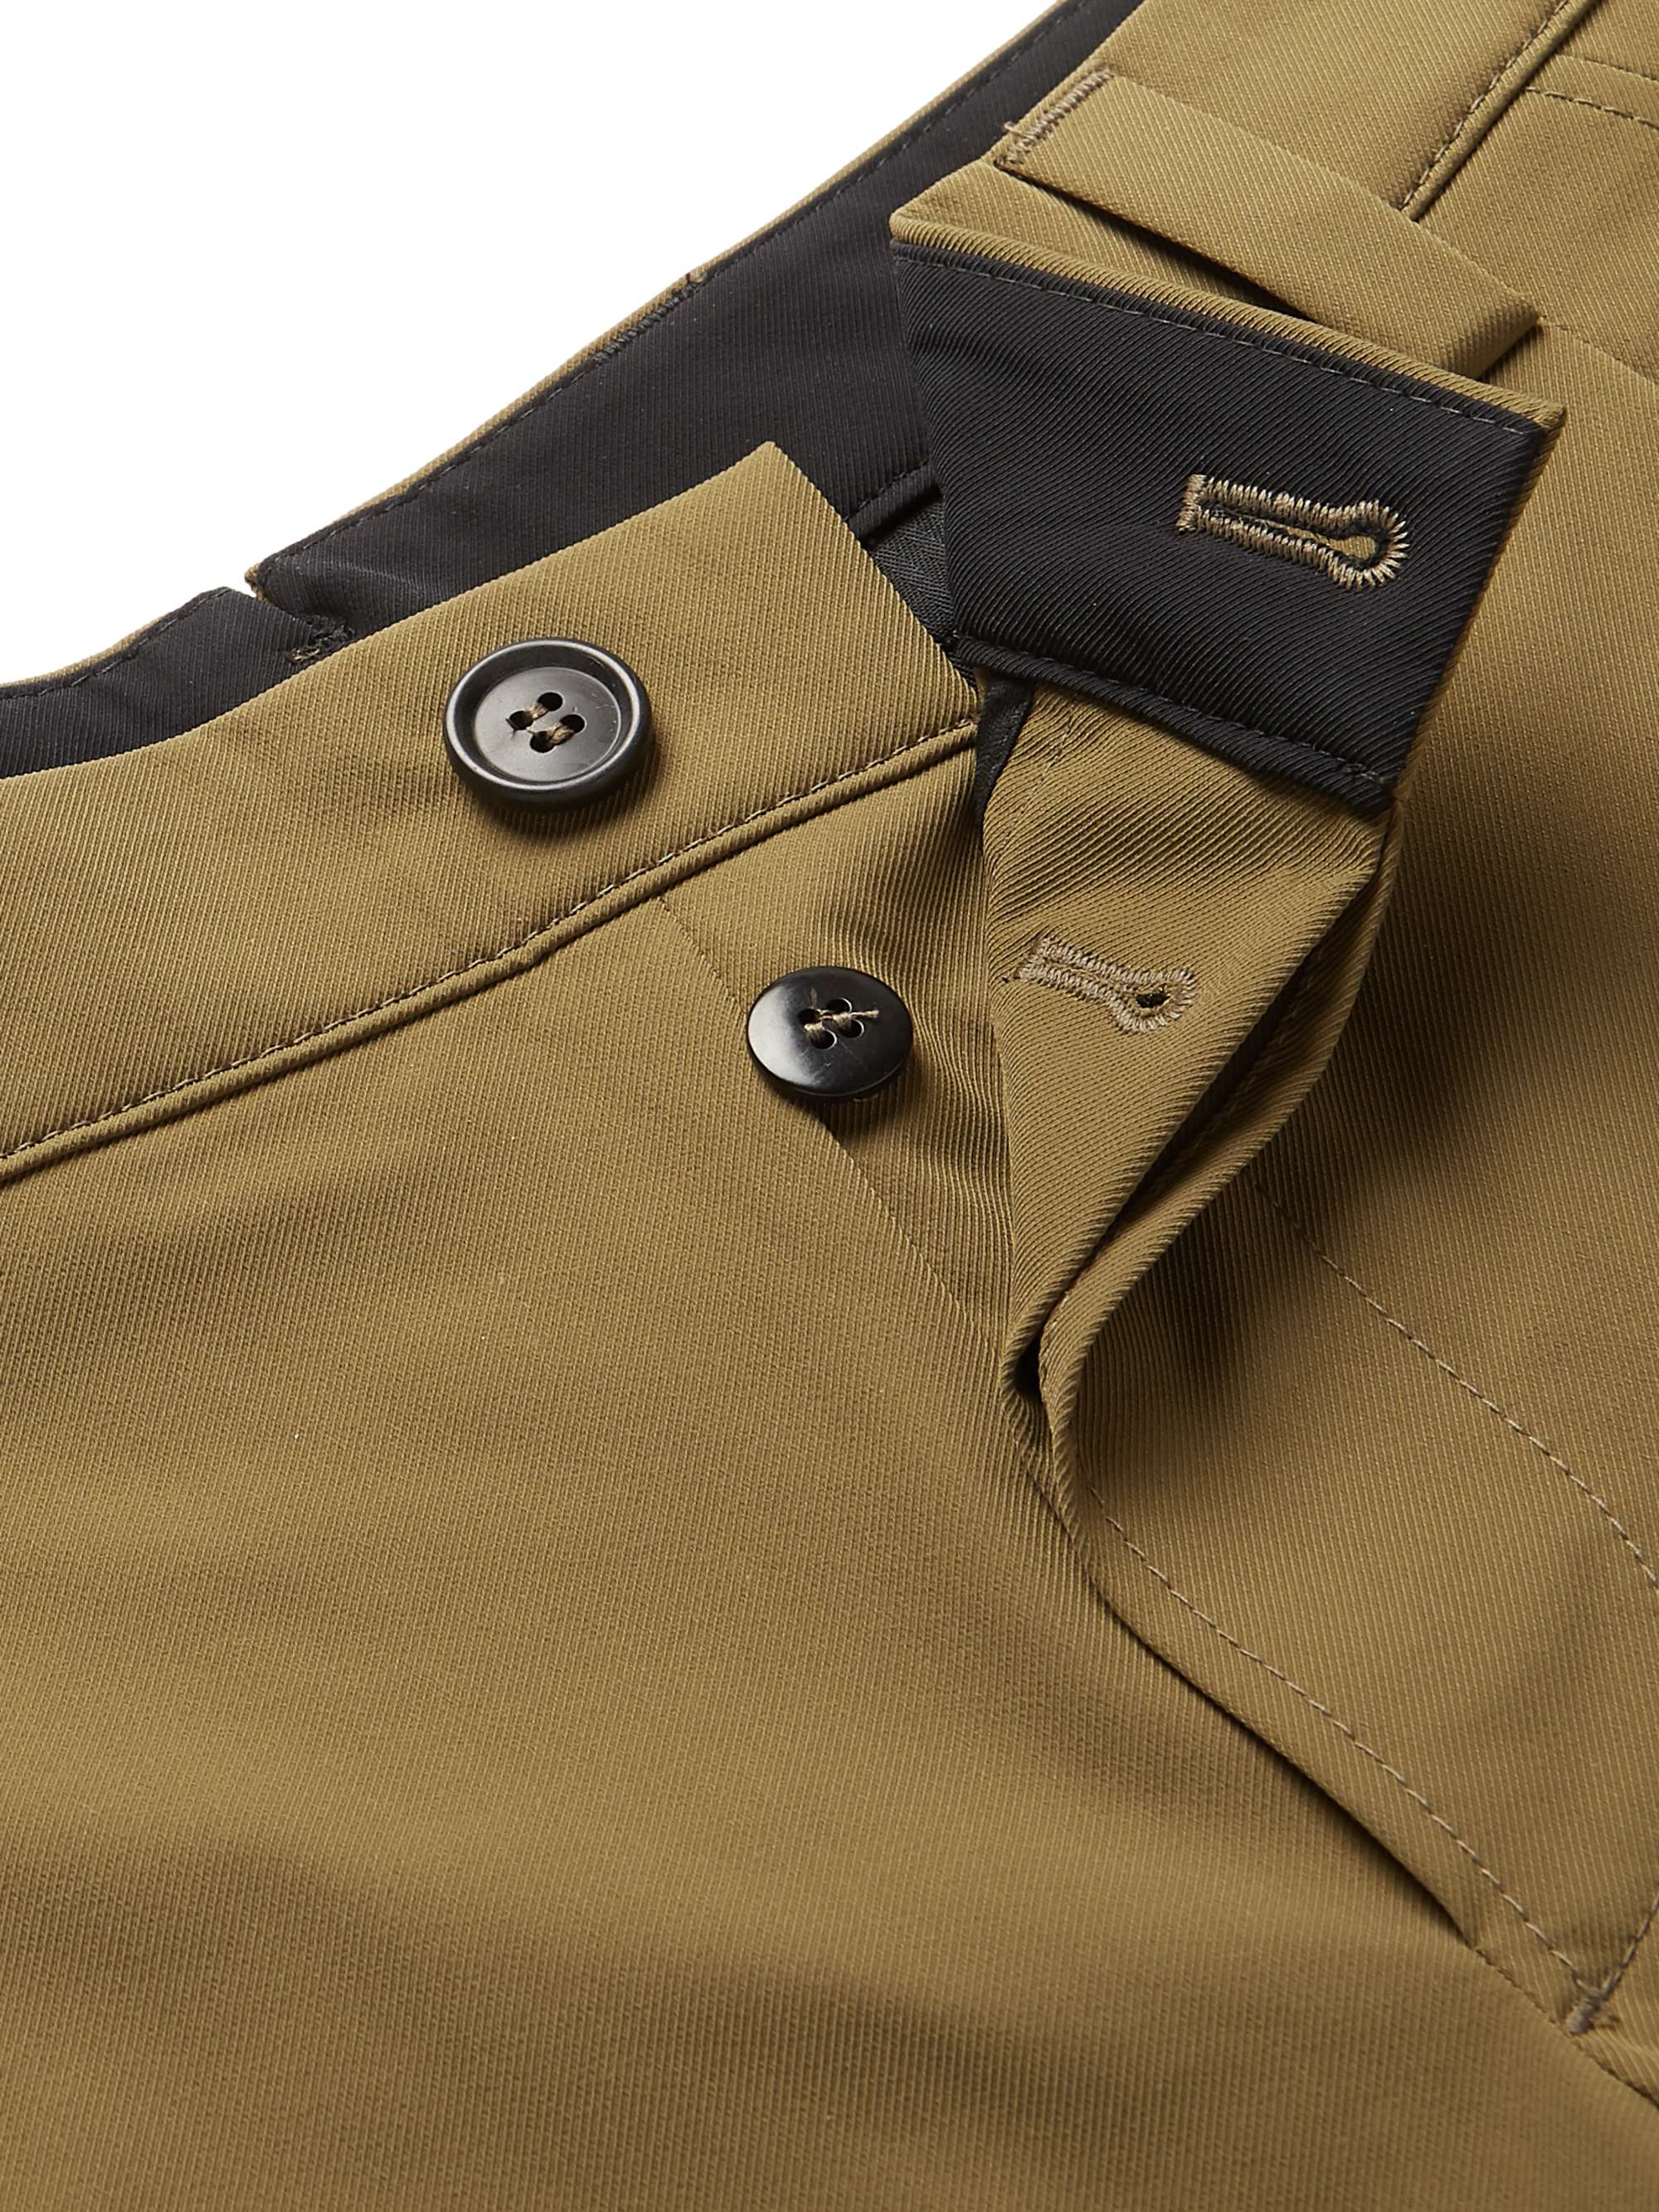 PRADA Slim-Fit Tapered Pleated Tech-Twill Cargo Trousers